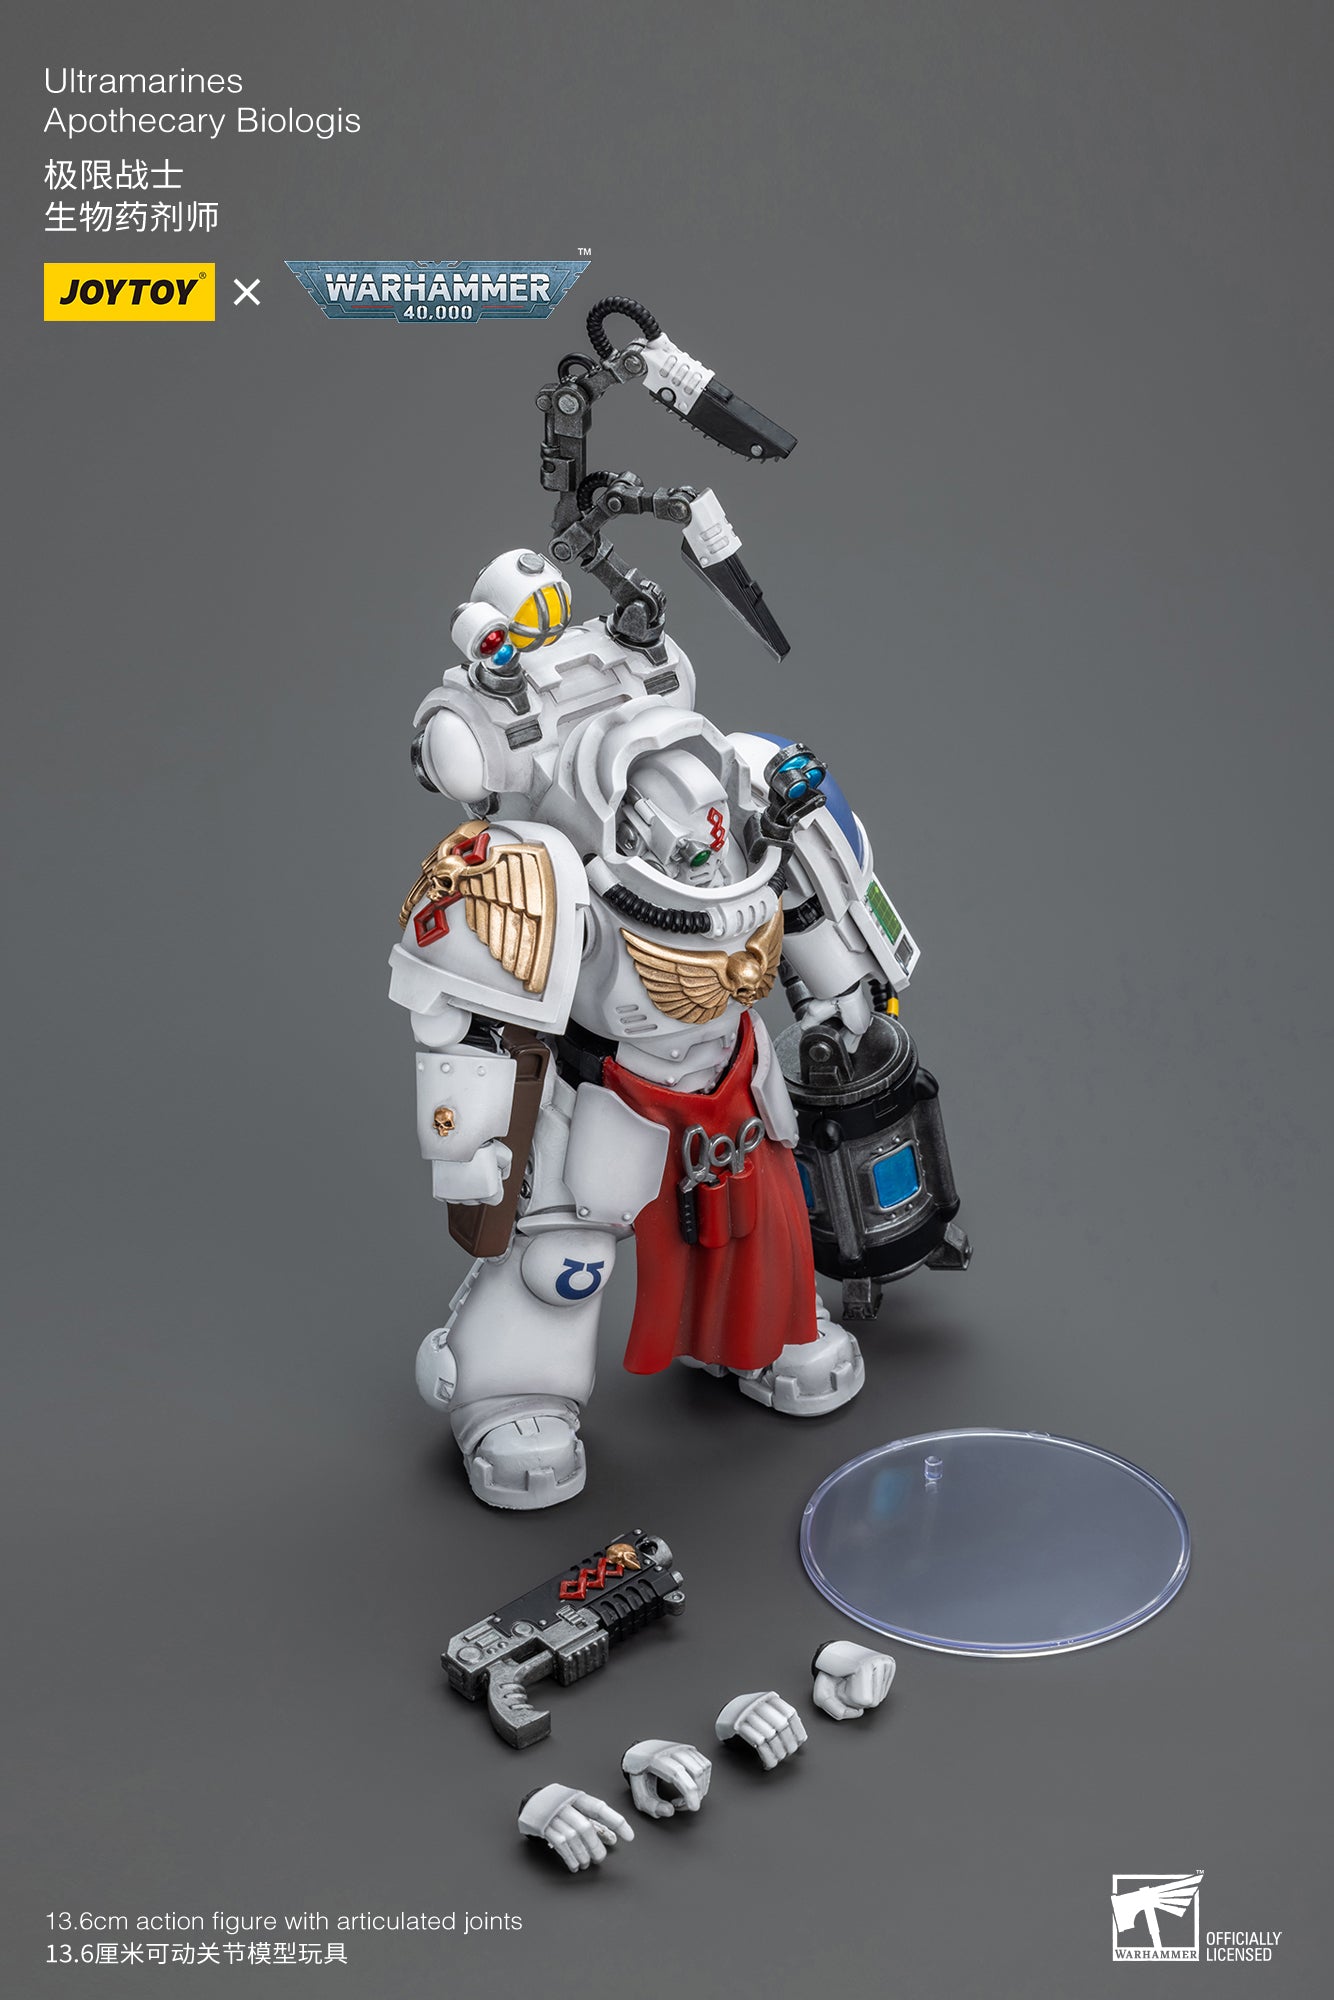 Uitramarines Apothecary Biologis  - Warhammer 40K Action Figure By JOYTOY